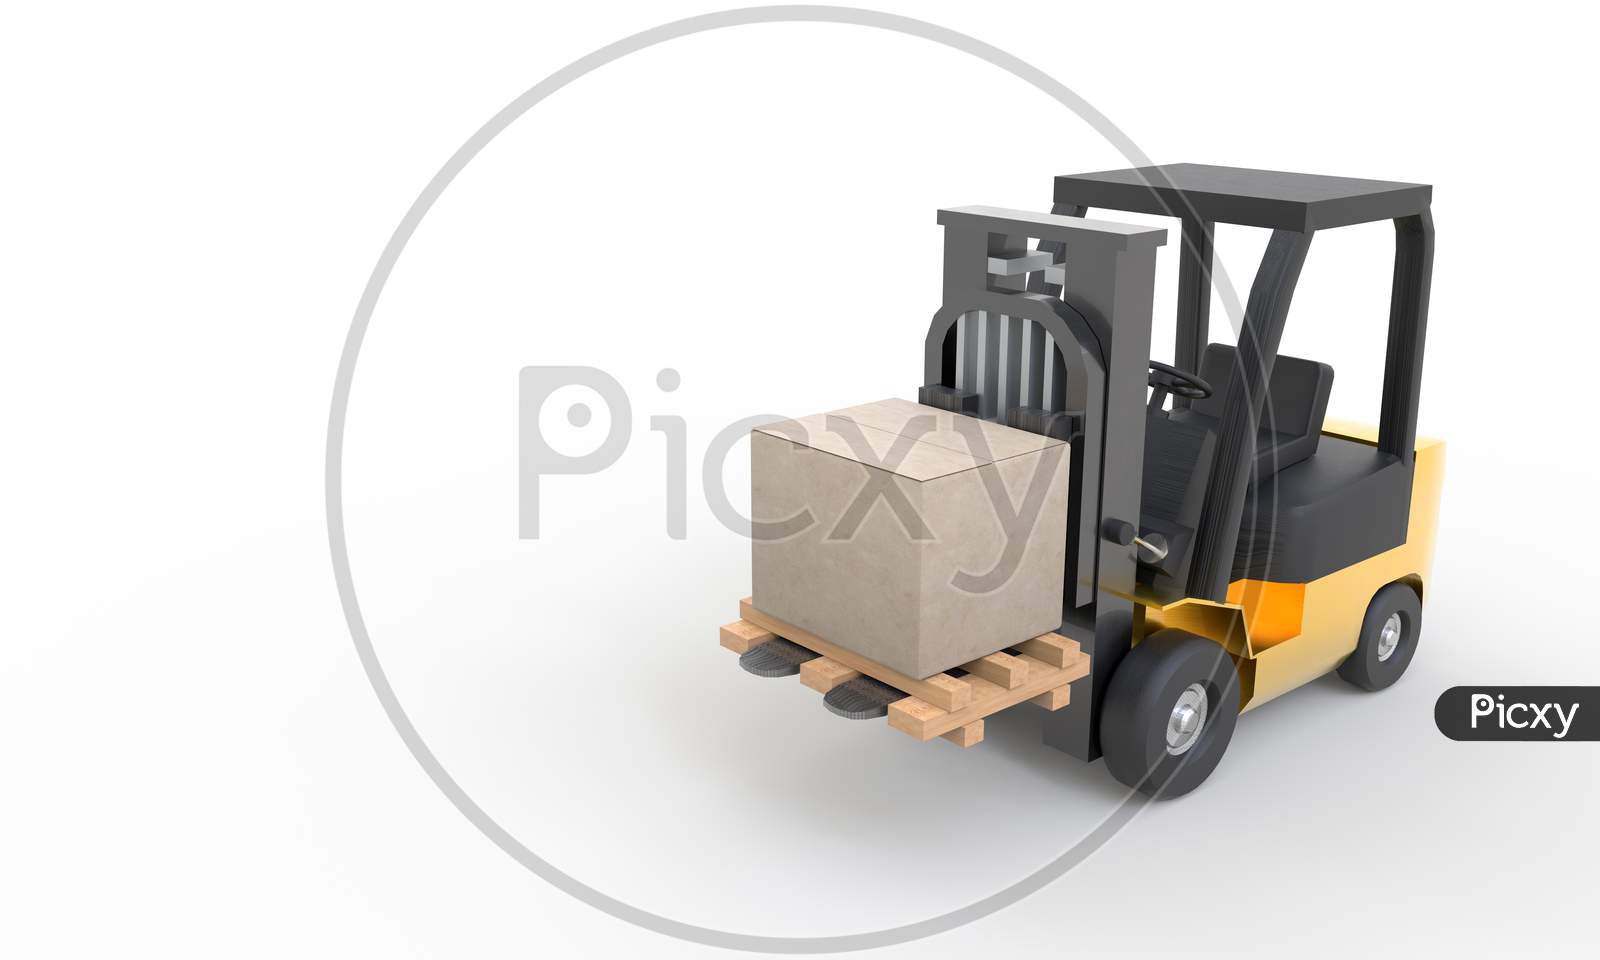 Yellow Forklift Moving And Lifting Up Cardboard Box Pallet On White Background. Transportation And Industrial Concept. Shipment And Delivery Storage. Copy Space. 3D Illustration Rendering